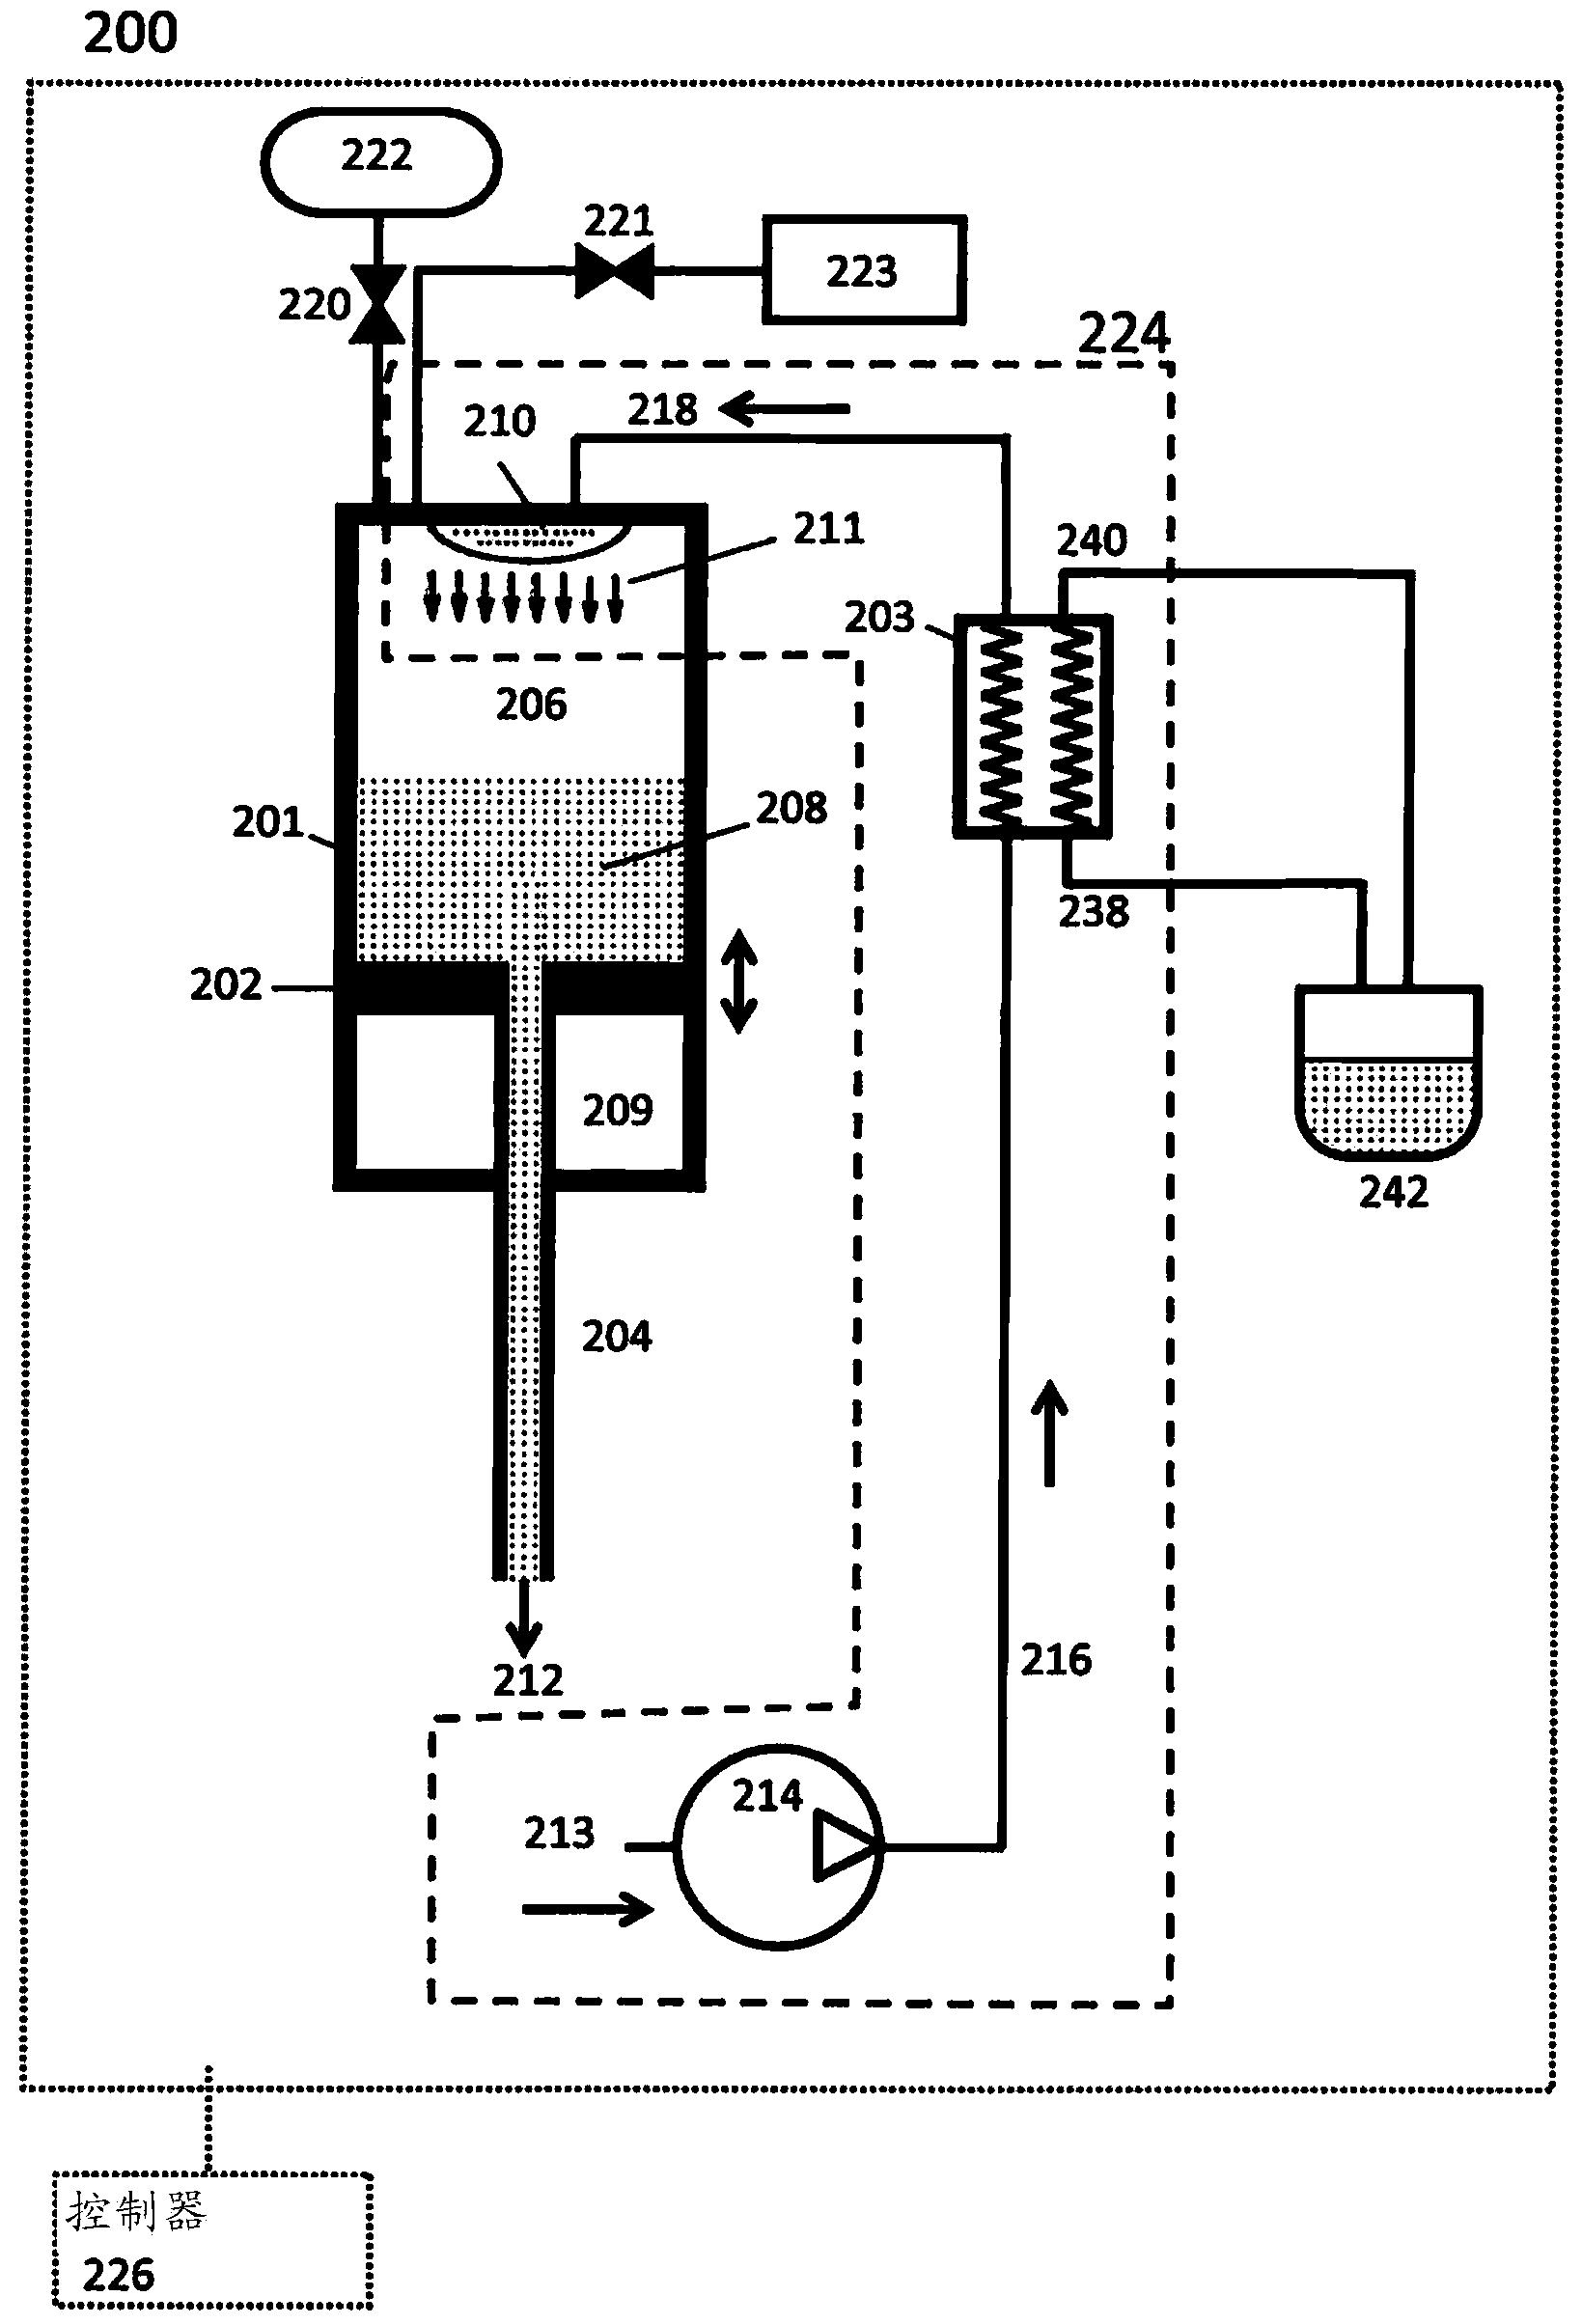 Systems and methods for efficient two-phase heat transfer in compressed-air energy storage systems